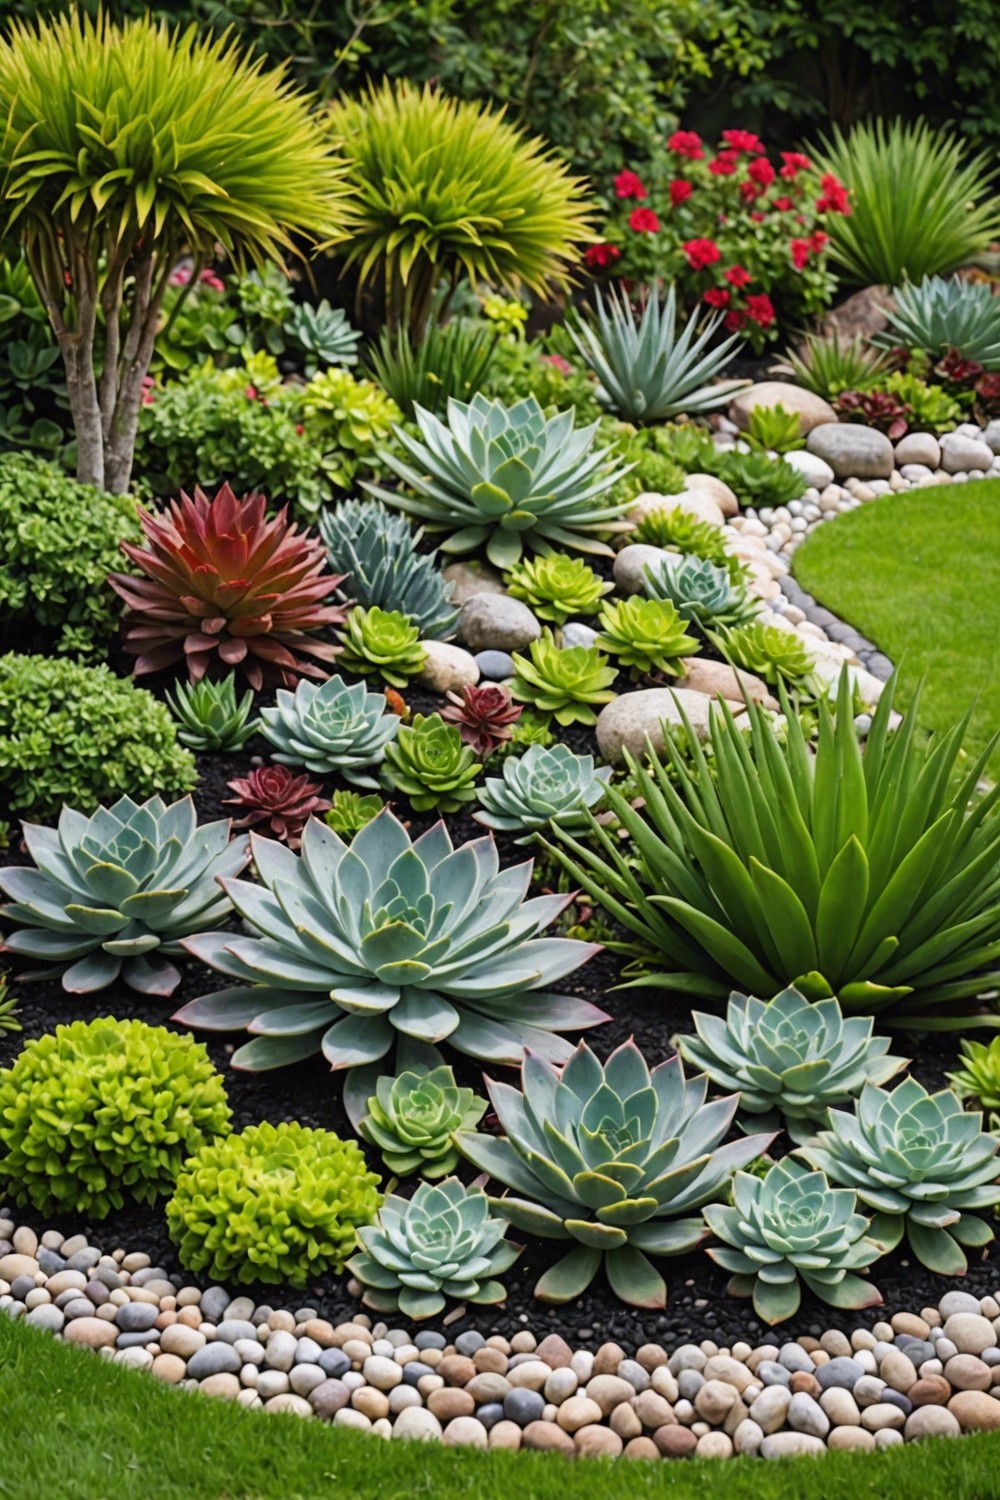 Succulent Edging for a Well-Defined Border